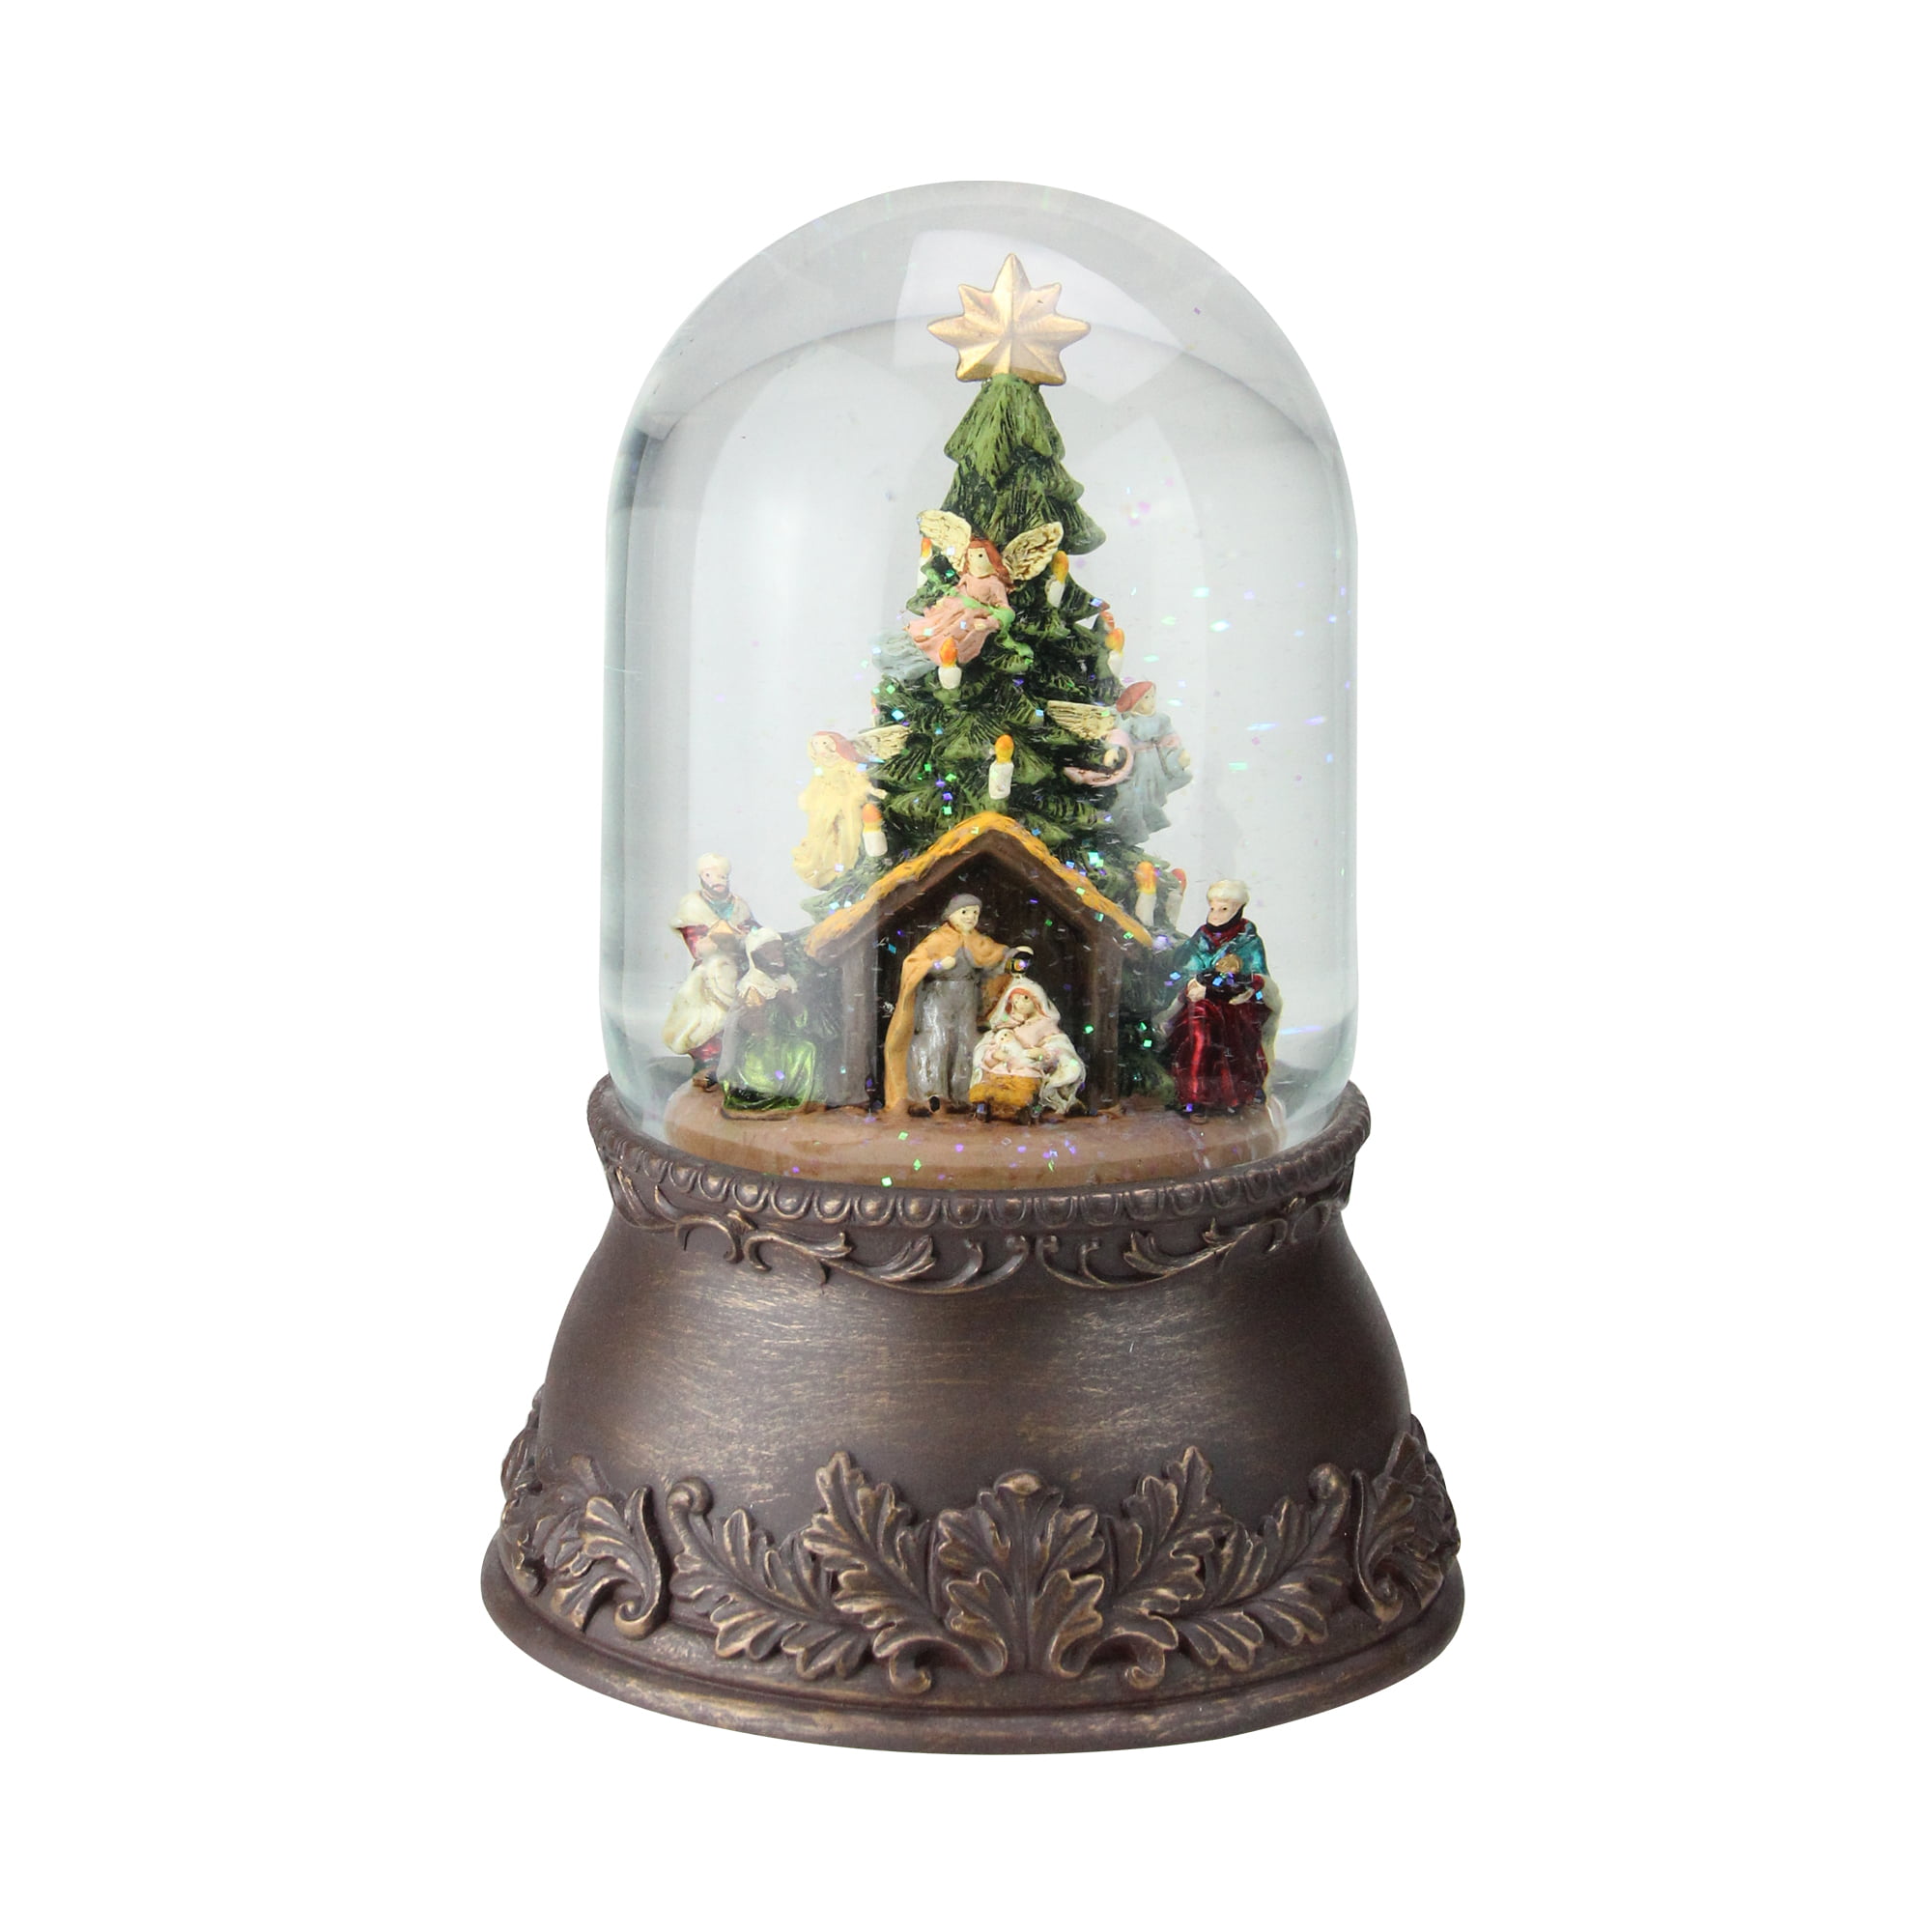 Premier Decorations Christmas Nativity 100mm Snow Globe Wind Up Musical